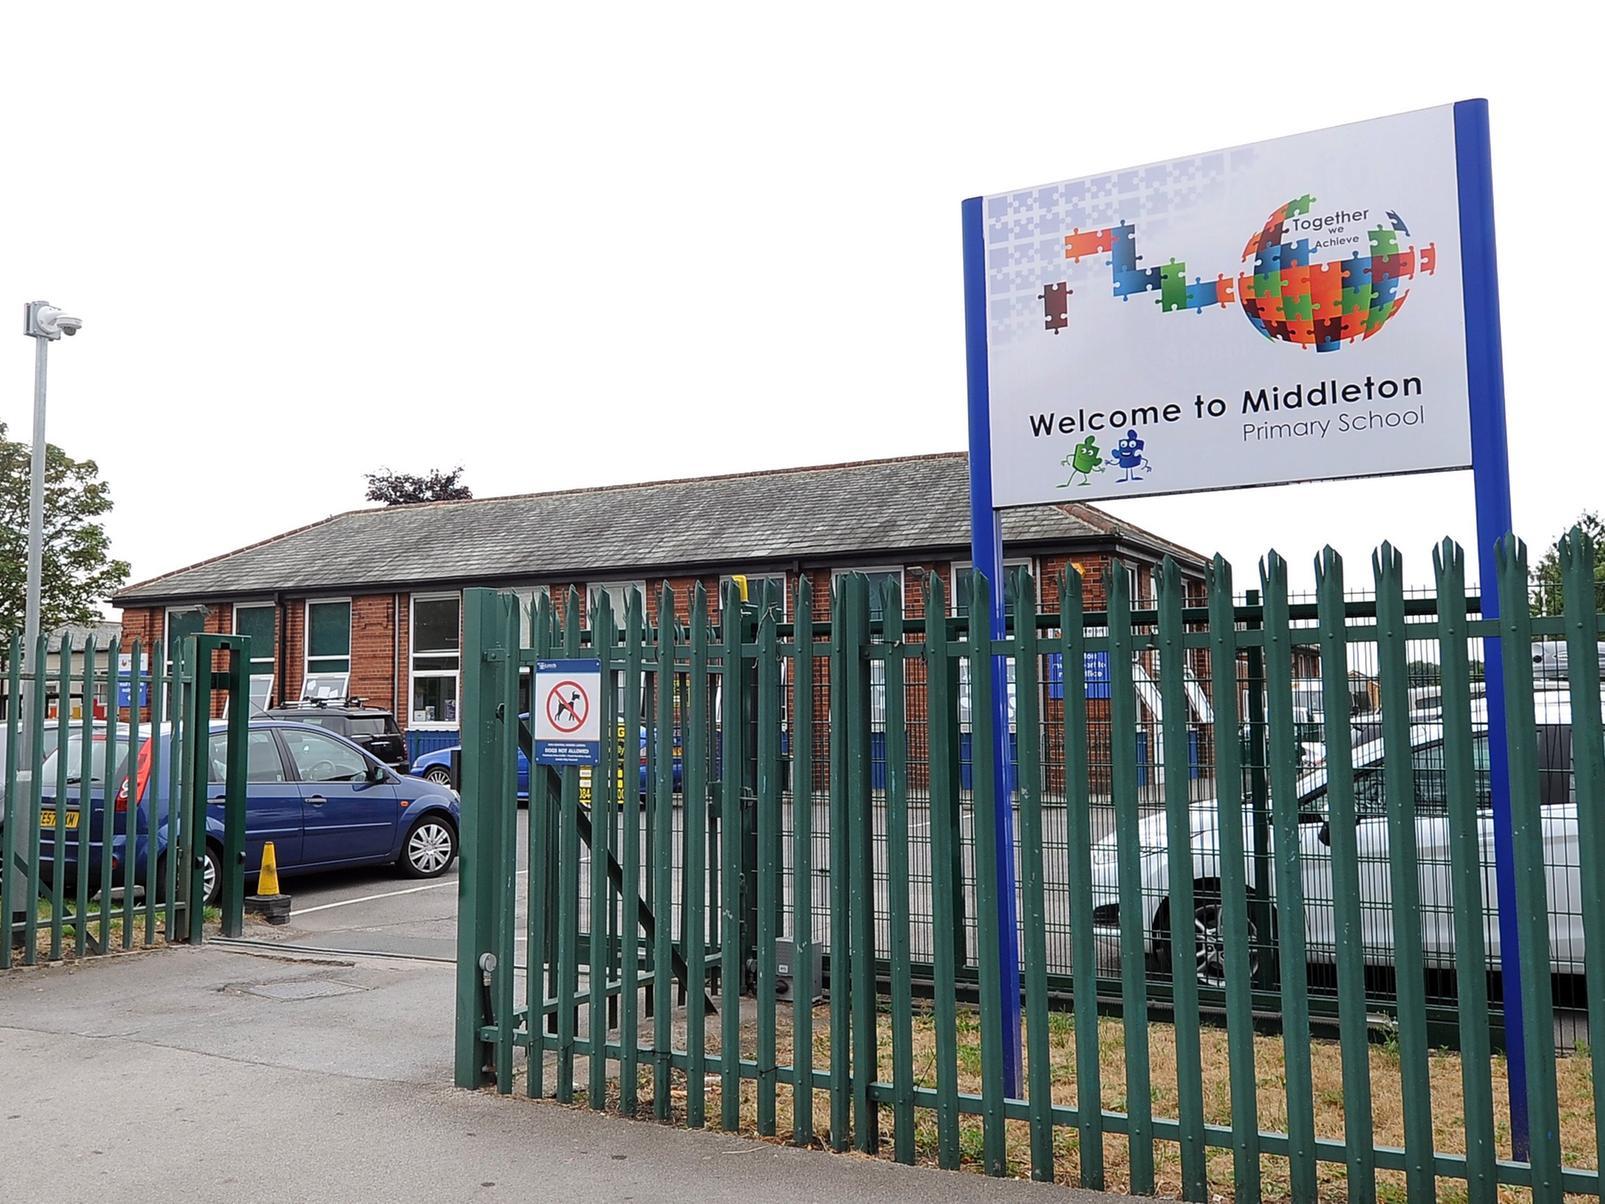 33 per cent of students at Middleton Primary School met their expected standard